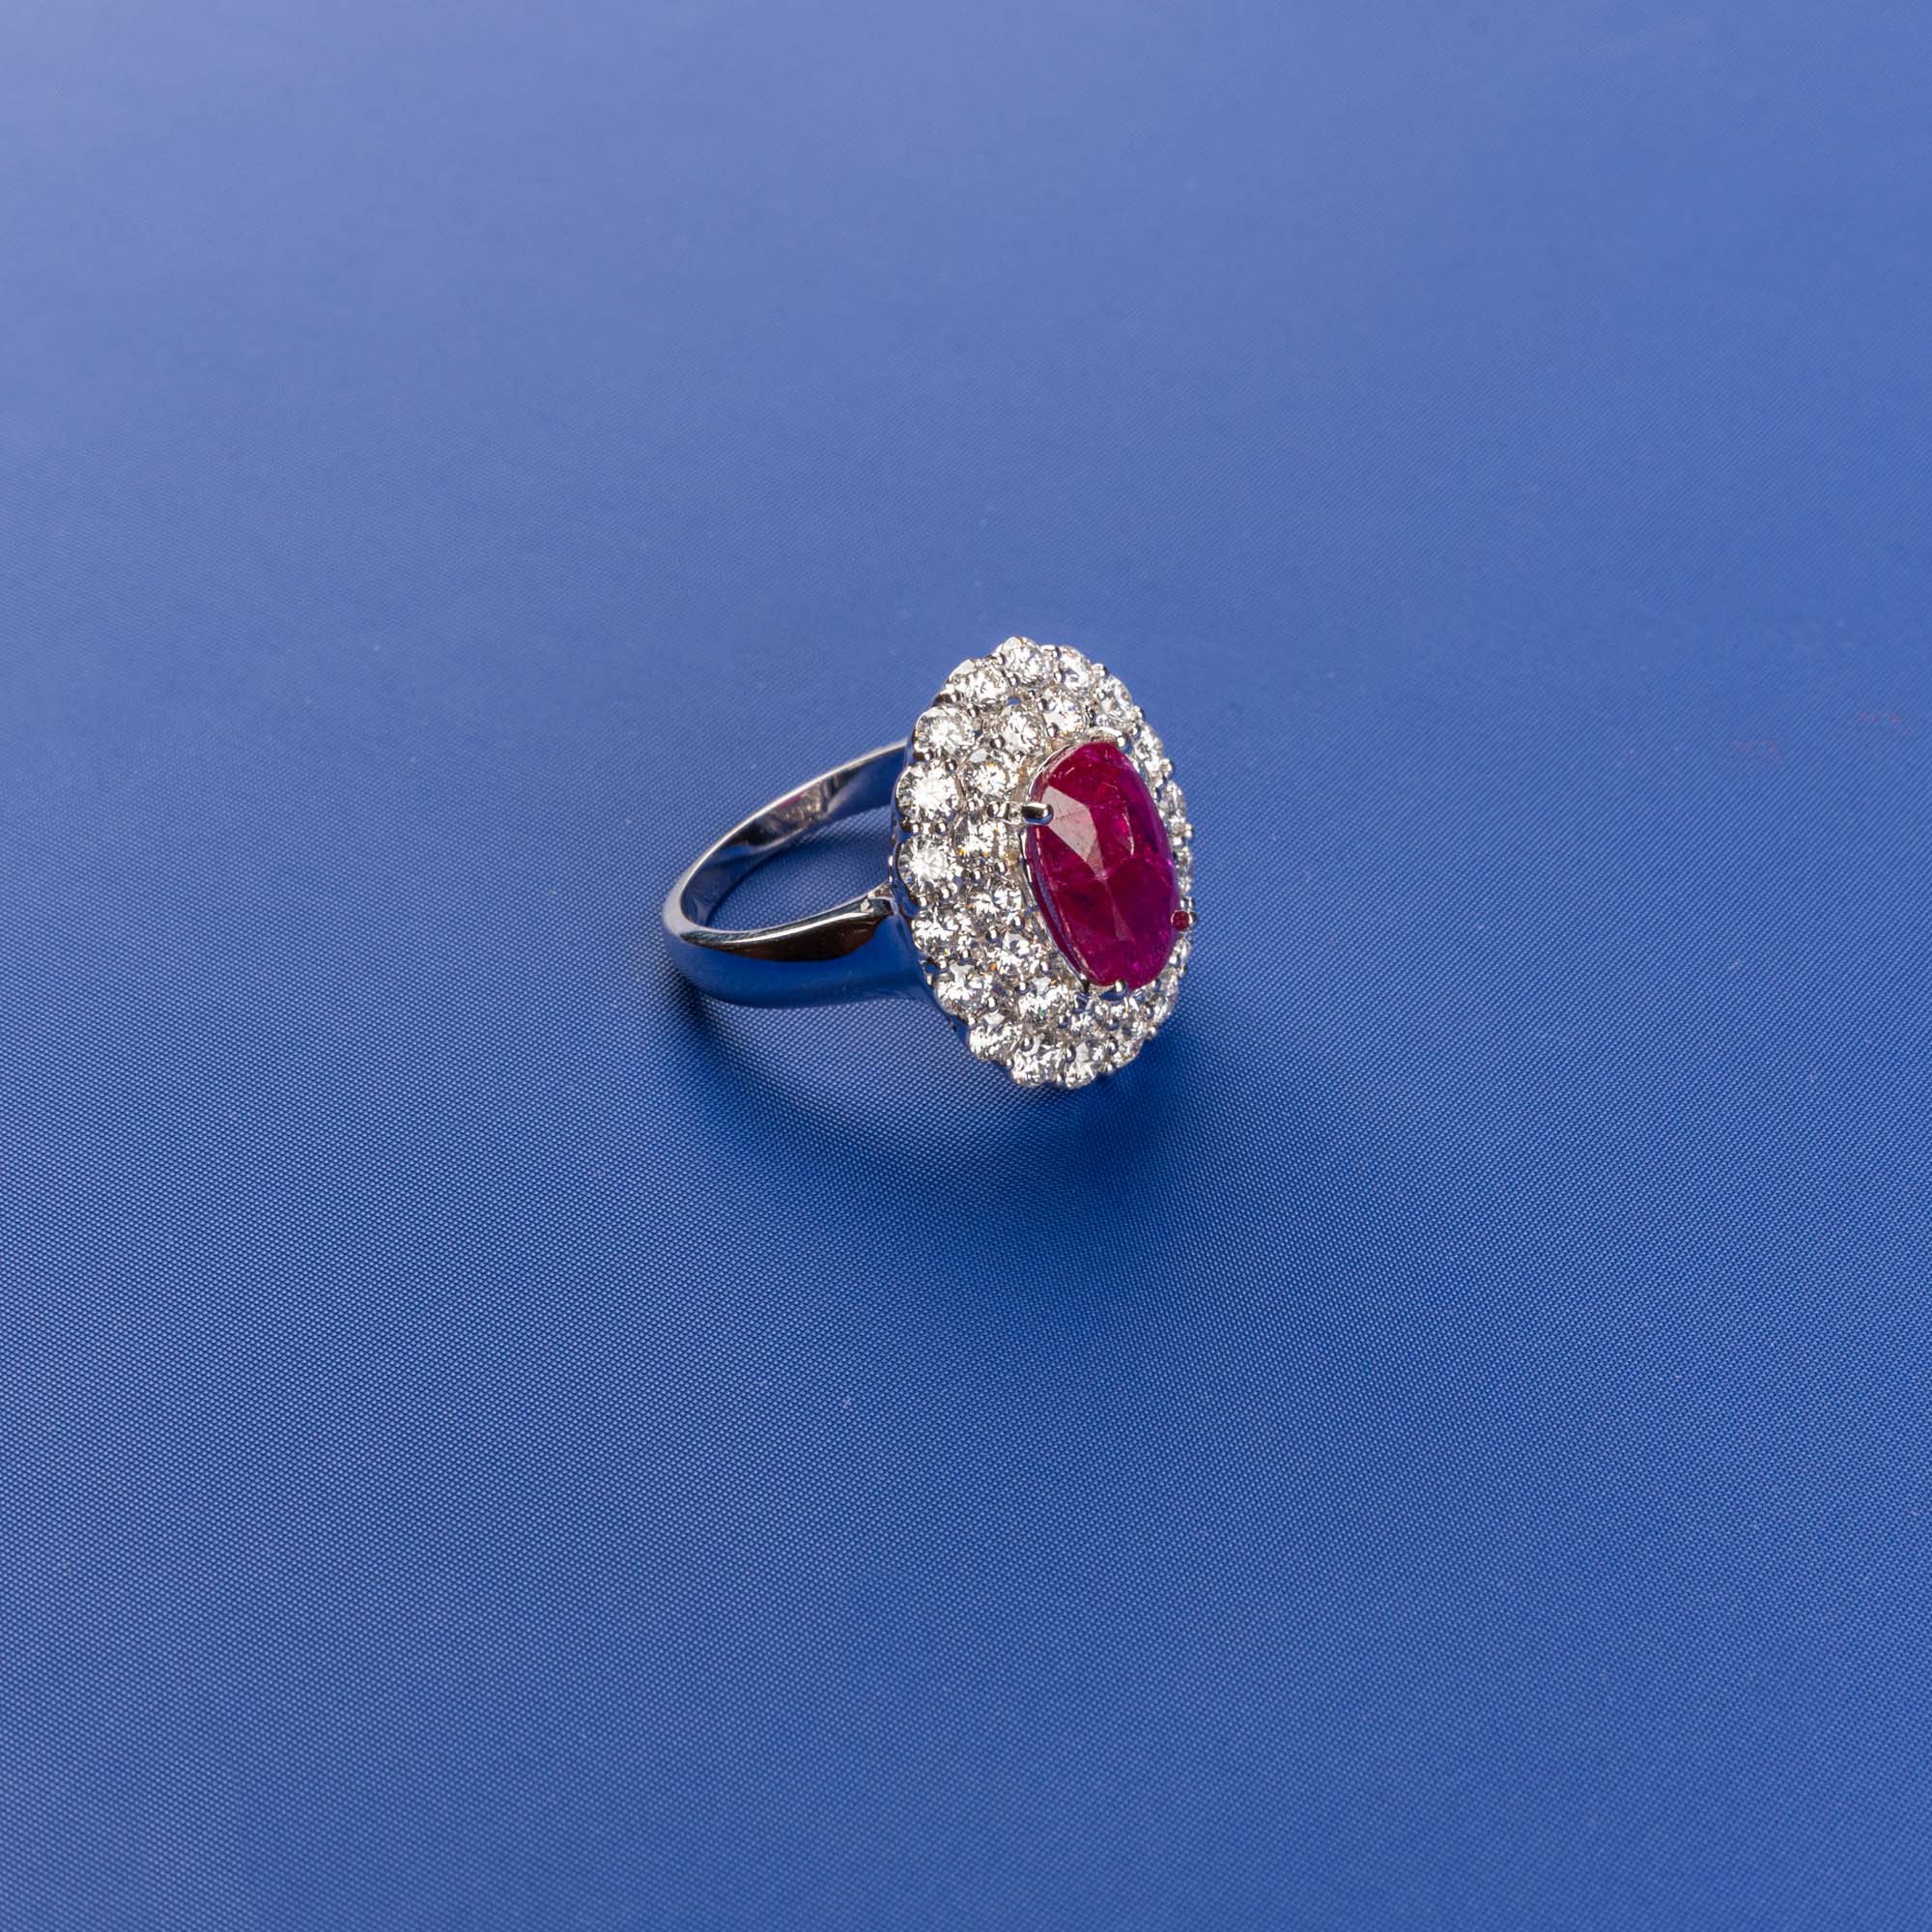 18K White Gold Diamond Ring with Ruby